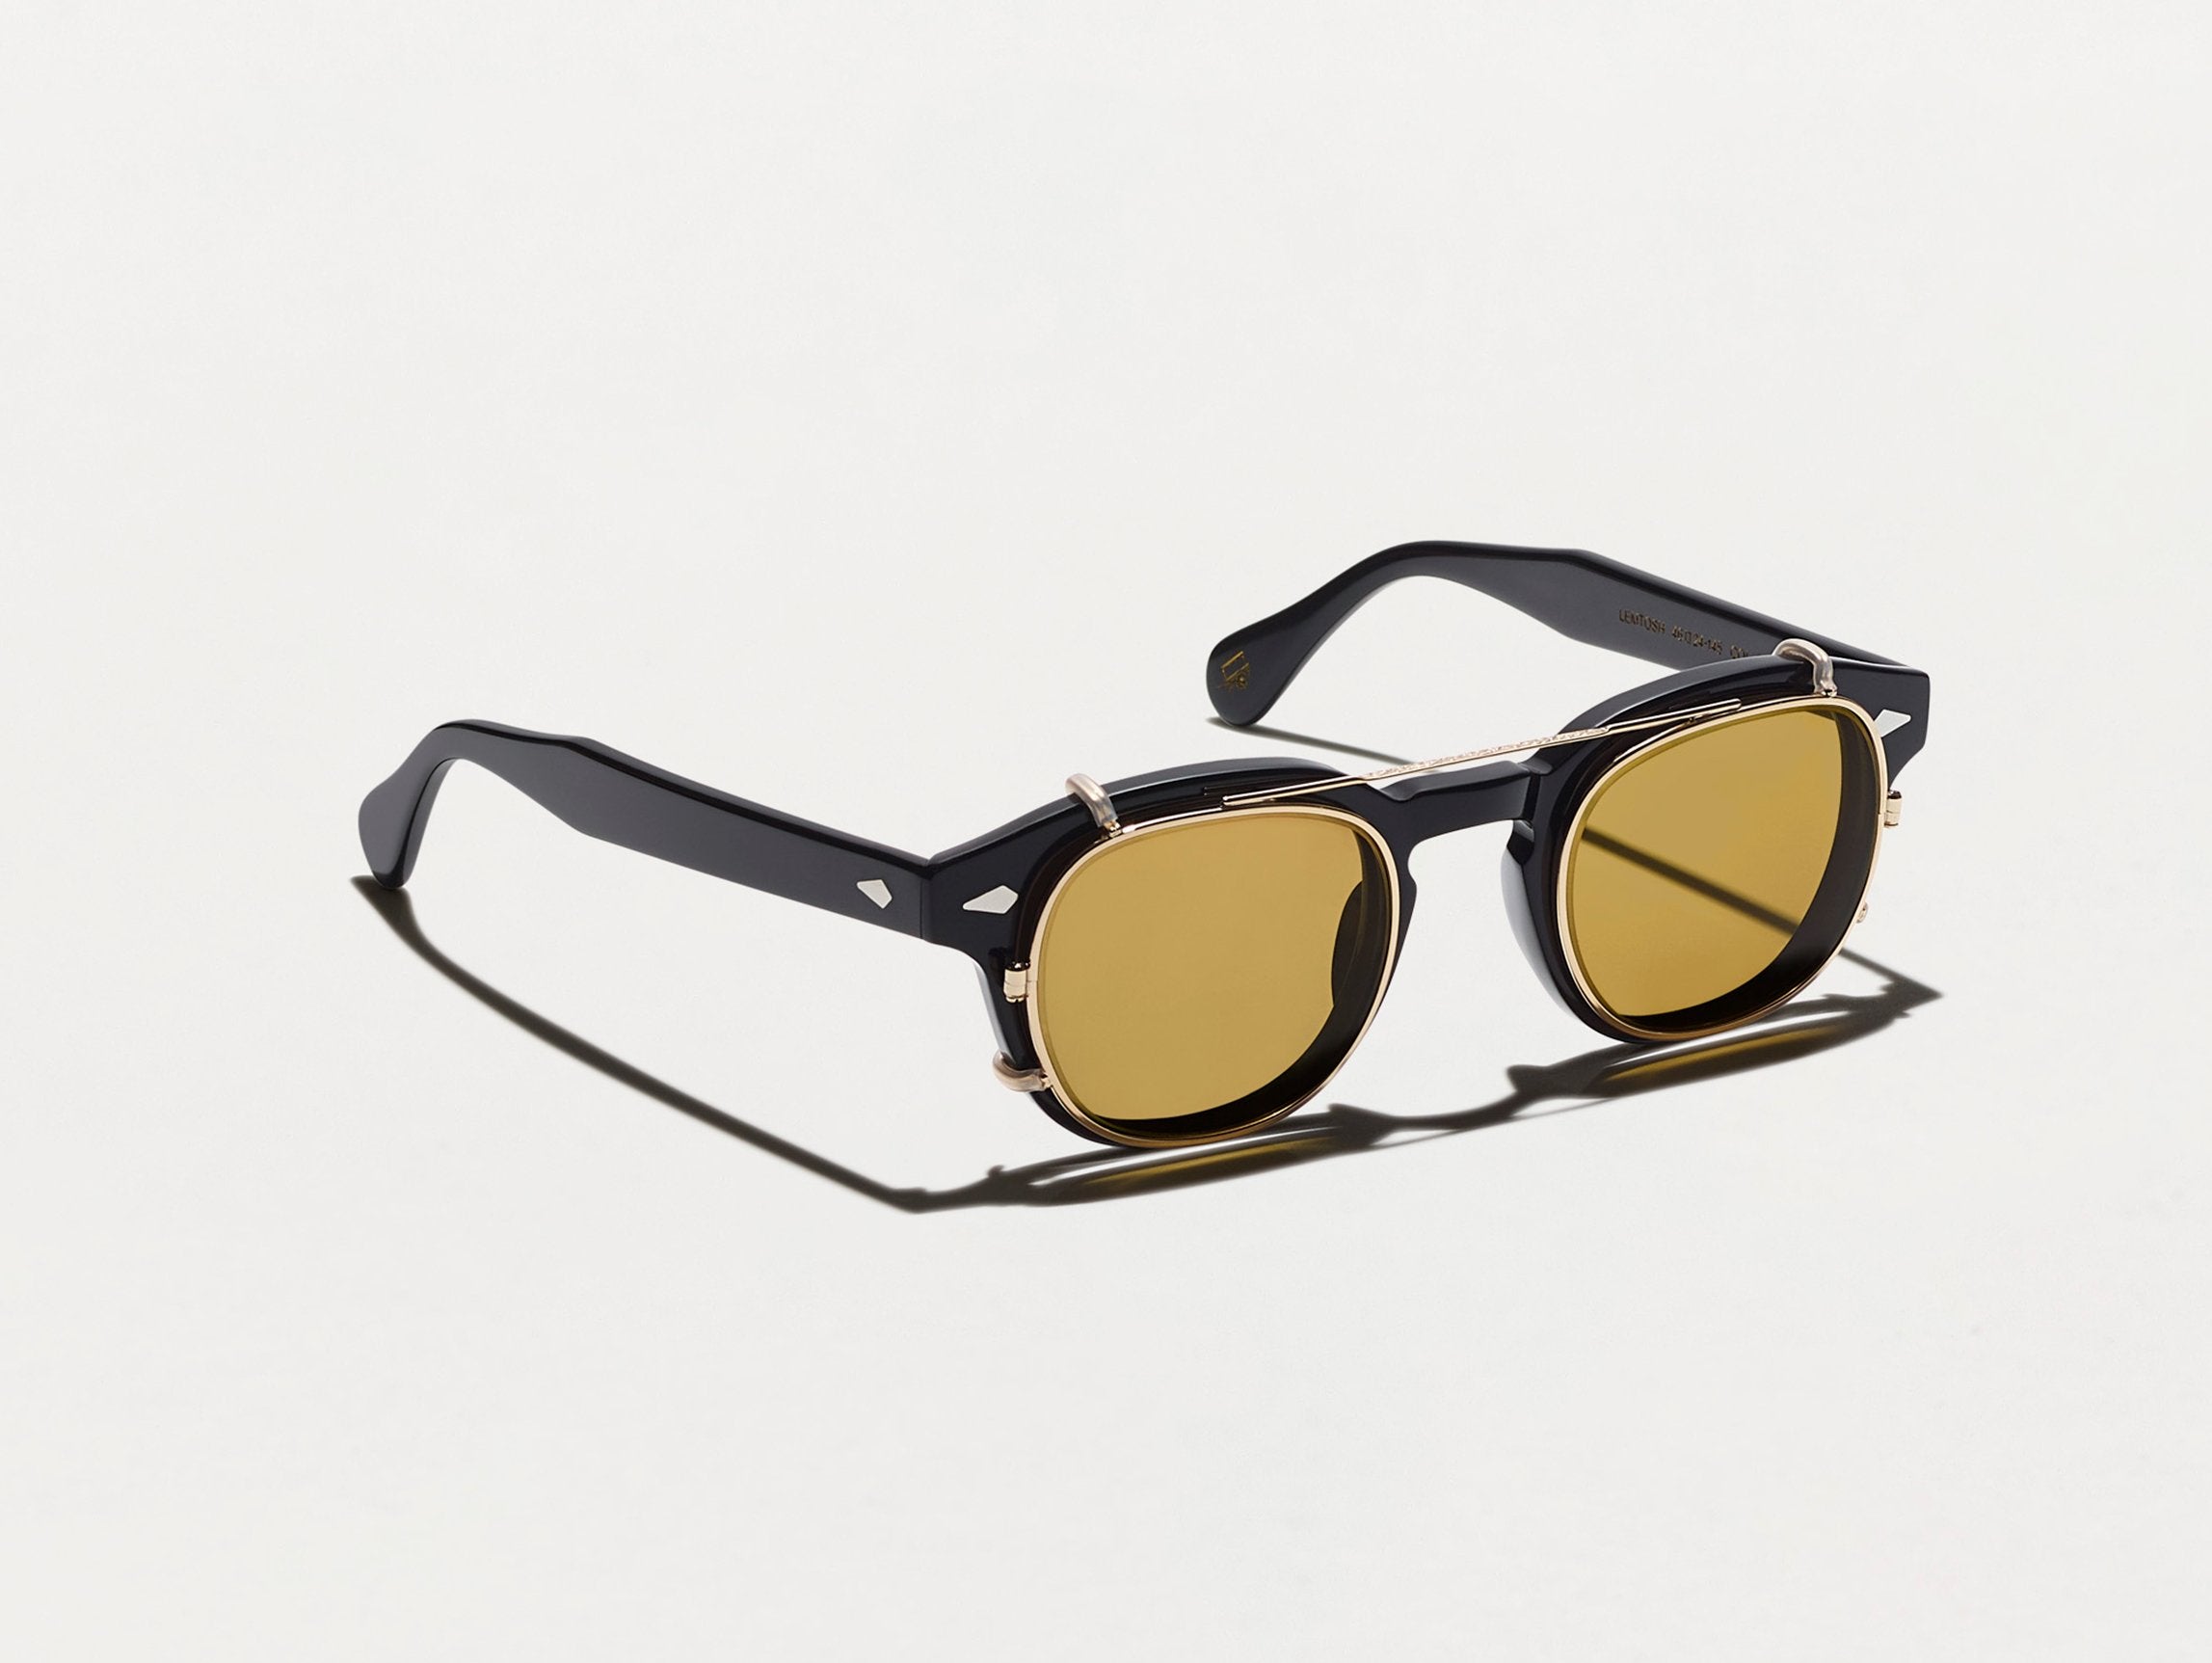 The CLIPTOSH in Gold with Amber Tinted Lenses